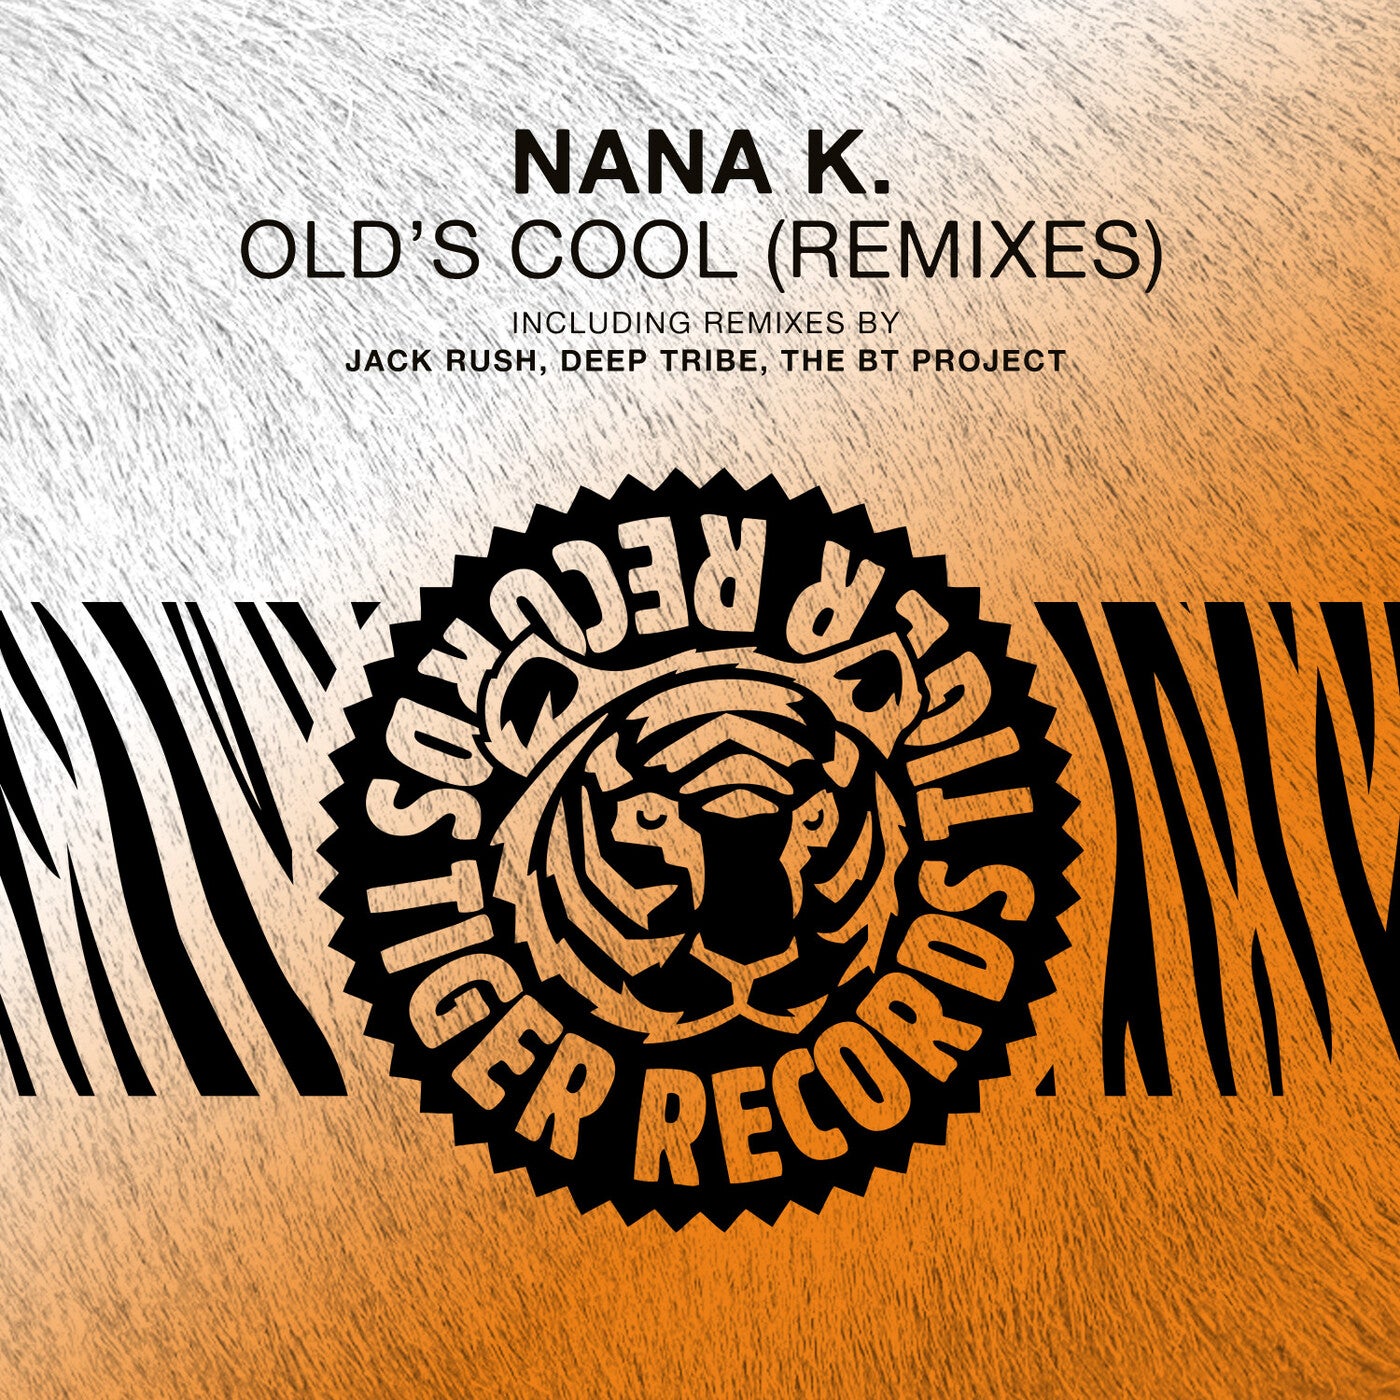 Old's Cool (Remixes)